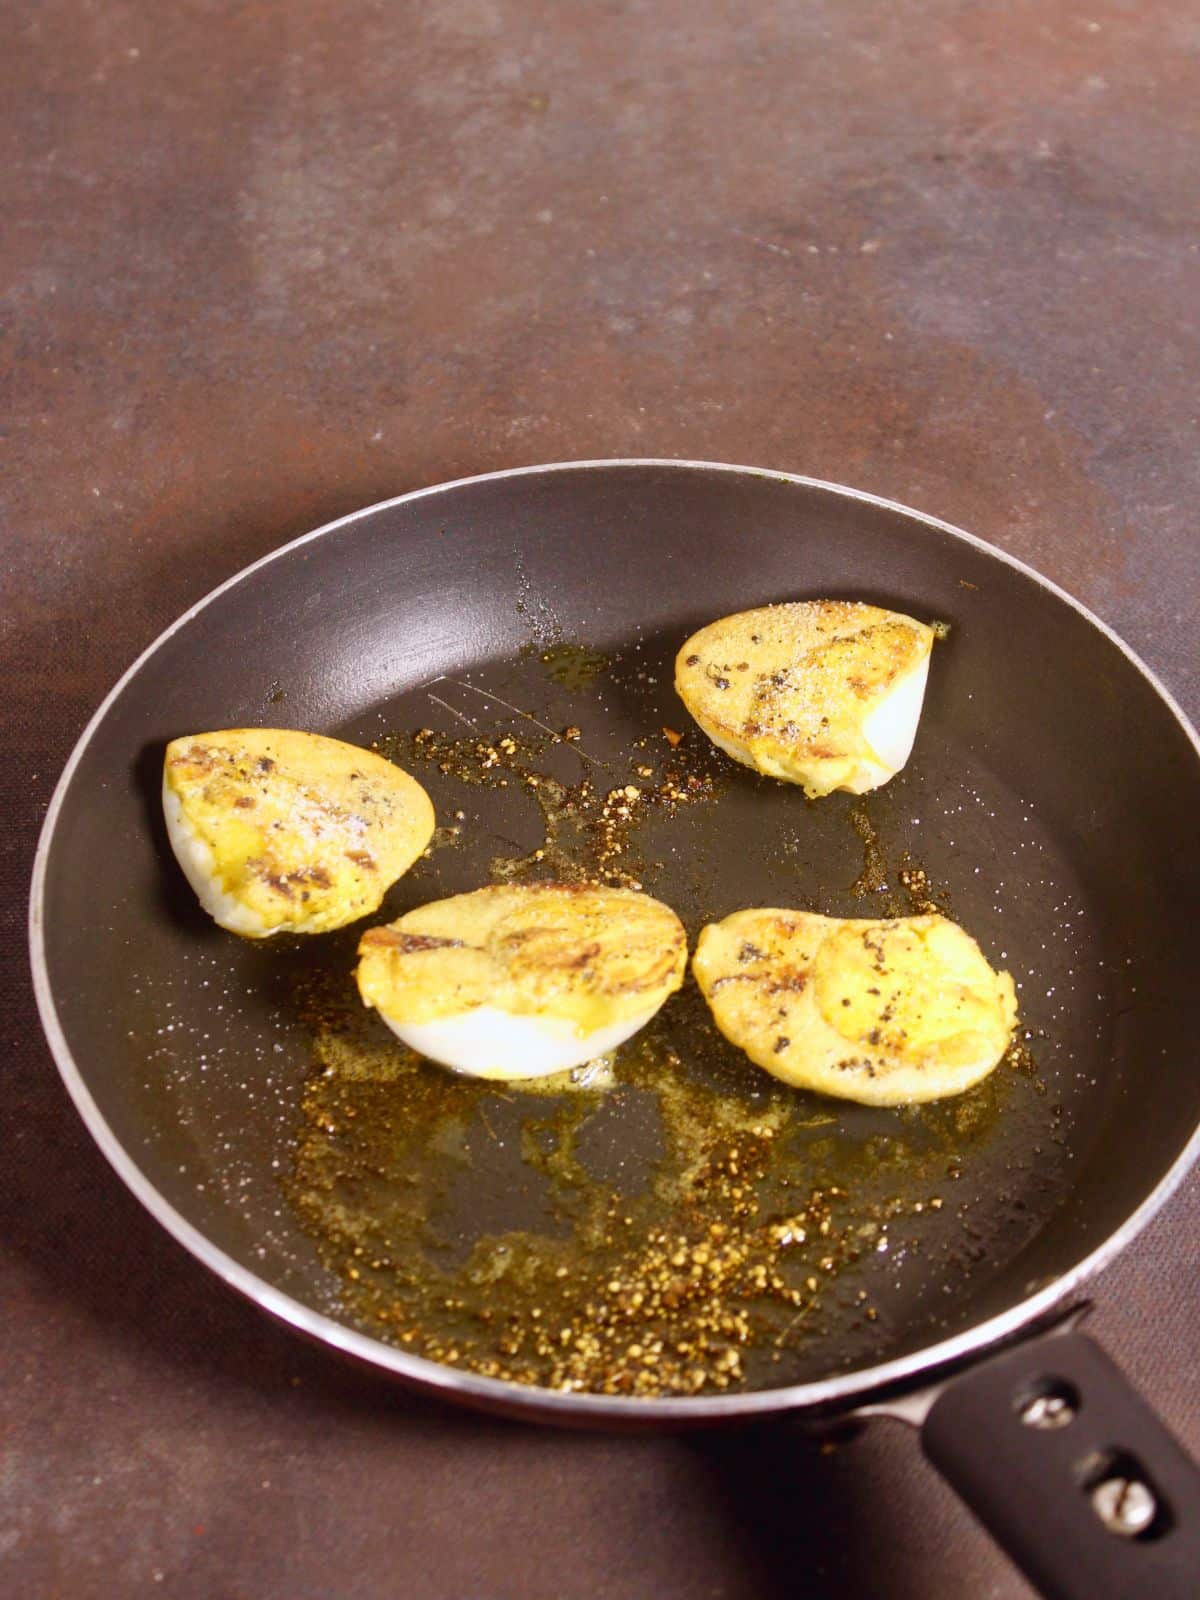 coat and fry eggs properly 